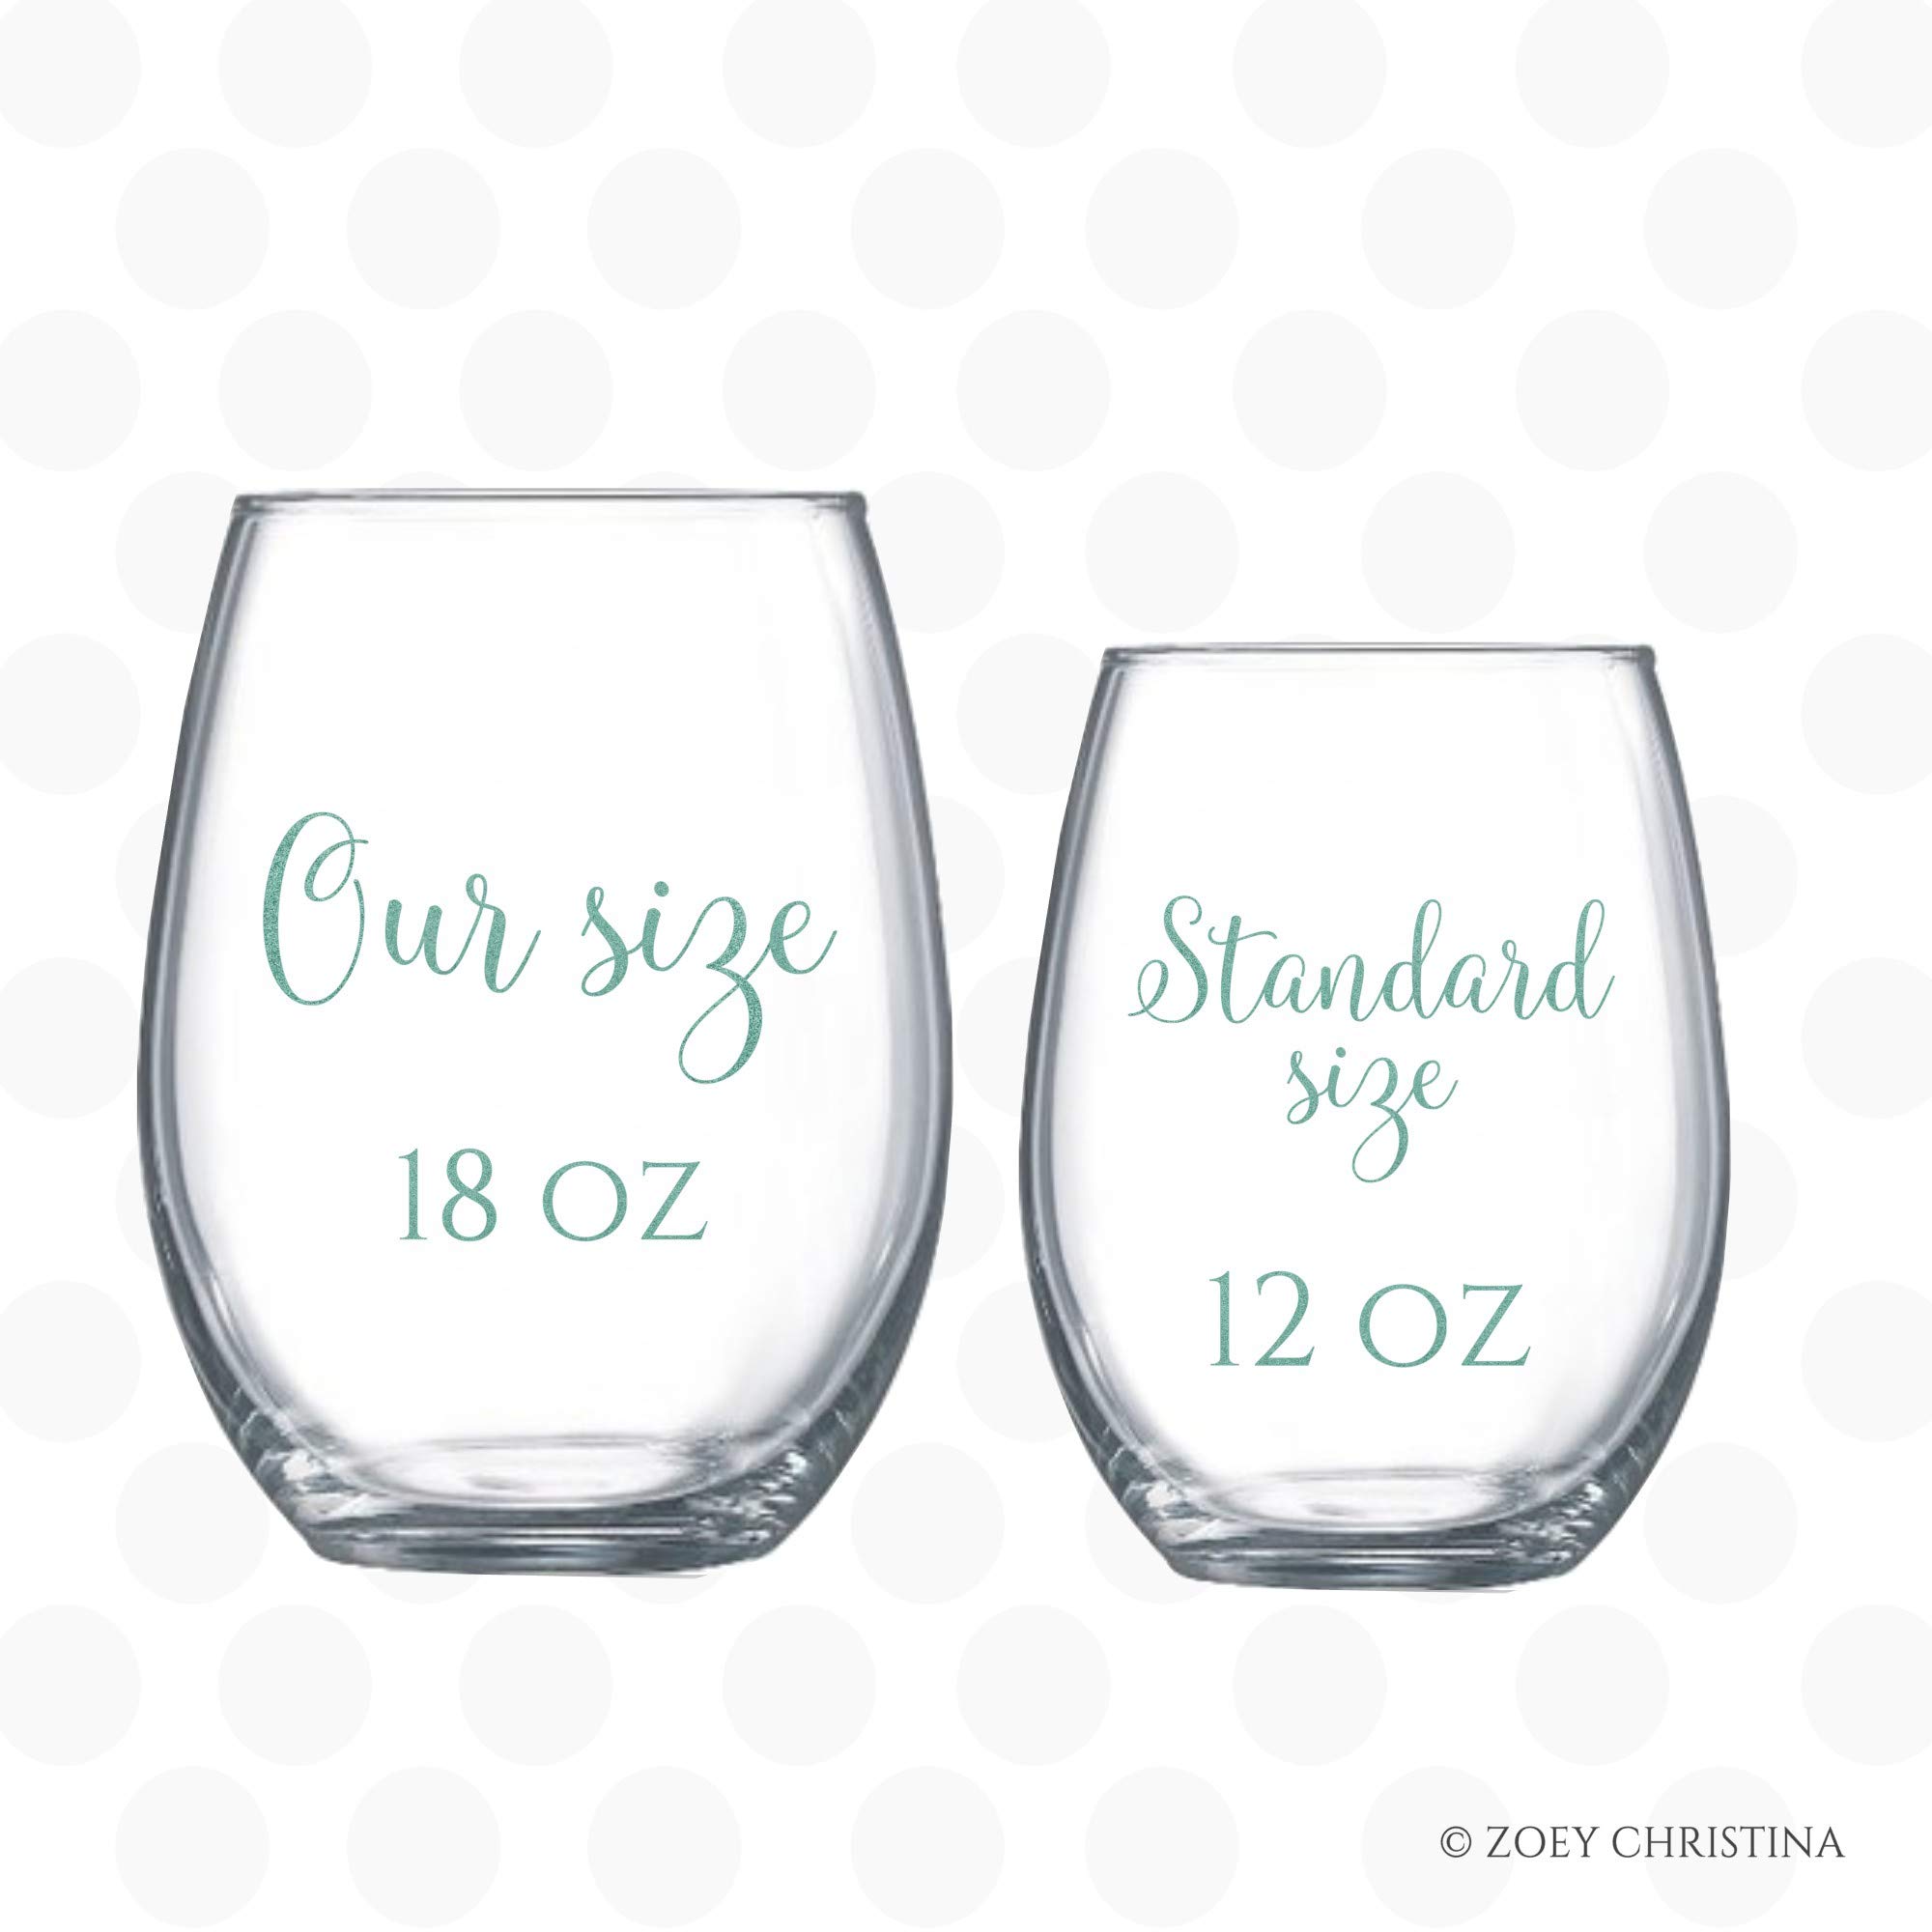 Yorkie Gifts for Women Best Yorkie Mom Dog Gifts Stemless Wine Glass for Her Large 0135